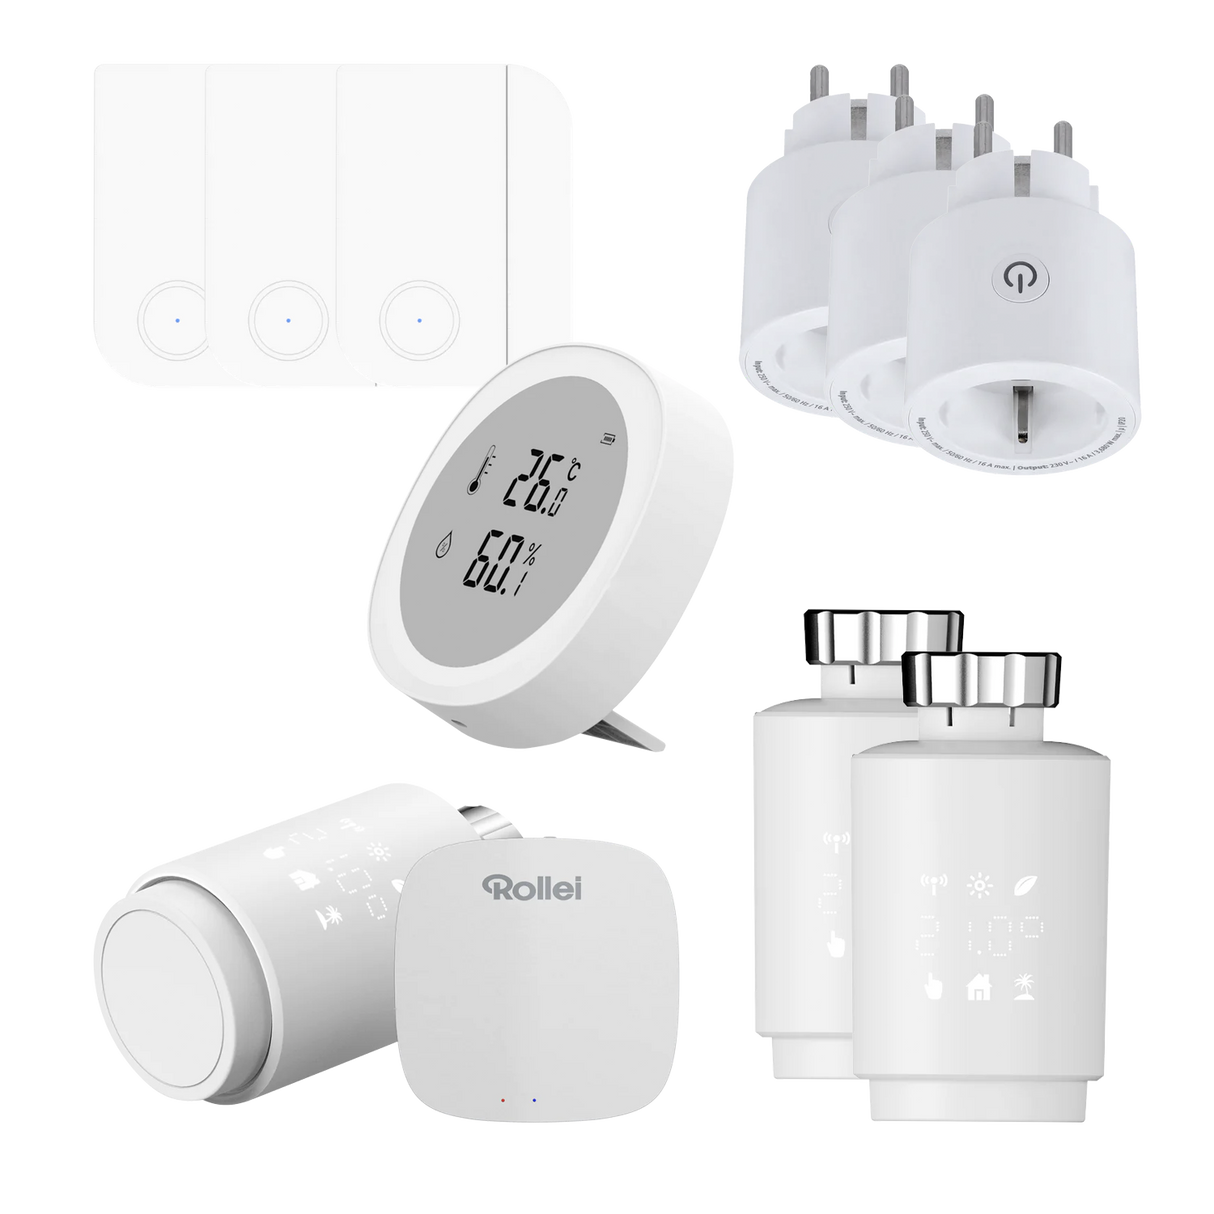 All-in-one Smart Home Bundle